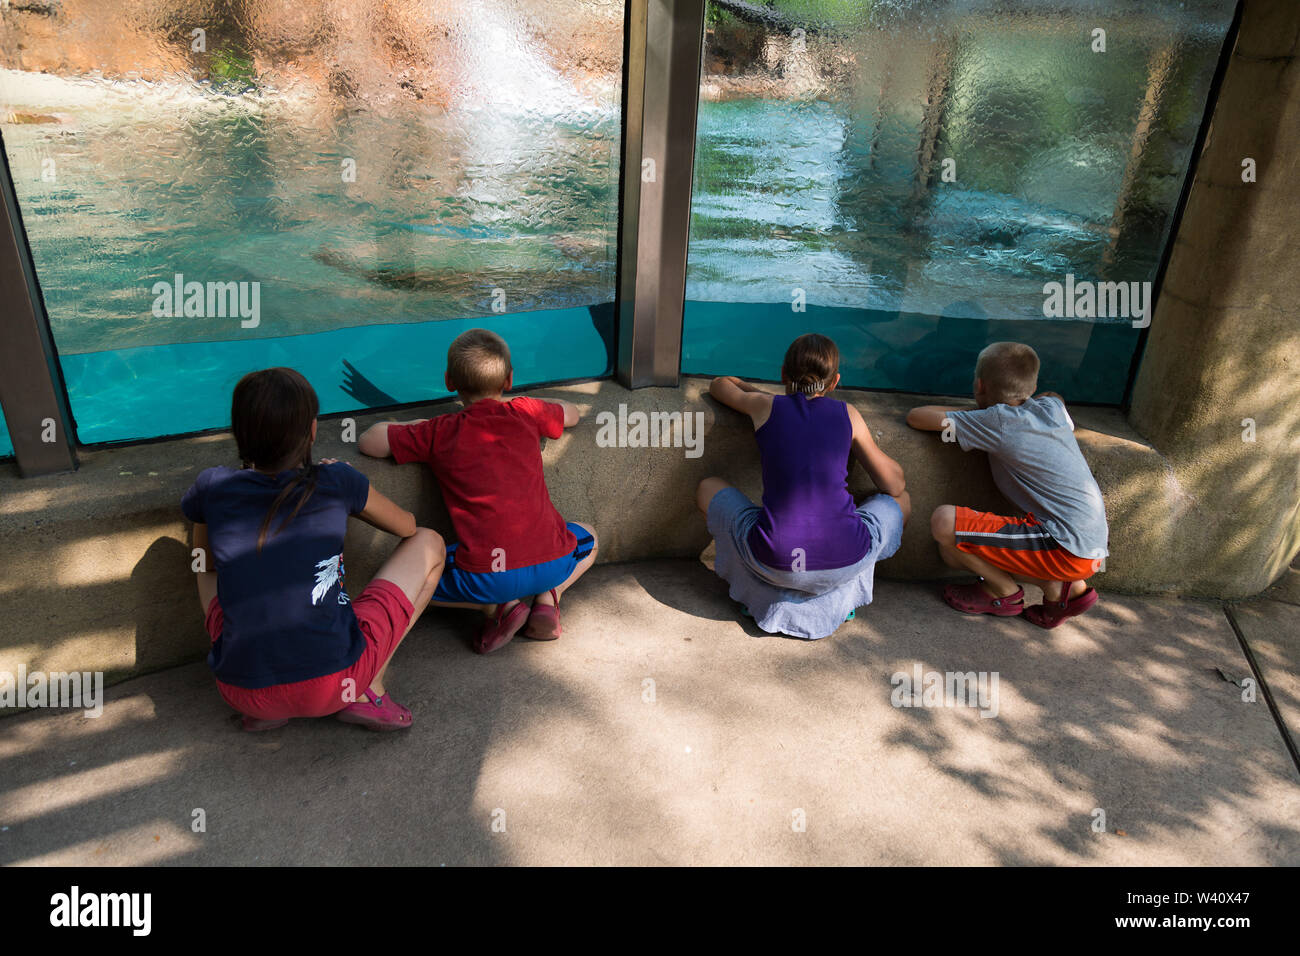 In an effort to see a Sea Lion, four children peer into the aquatic exhibit while visiting the Fort Wayne Children's Zoo in Fort Wayne, Indiana, USA. Stock Photo